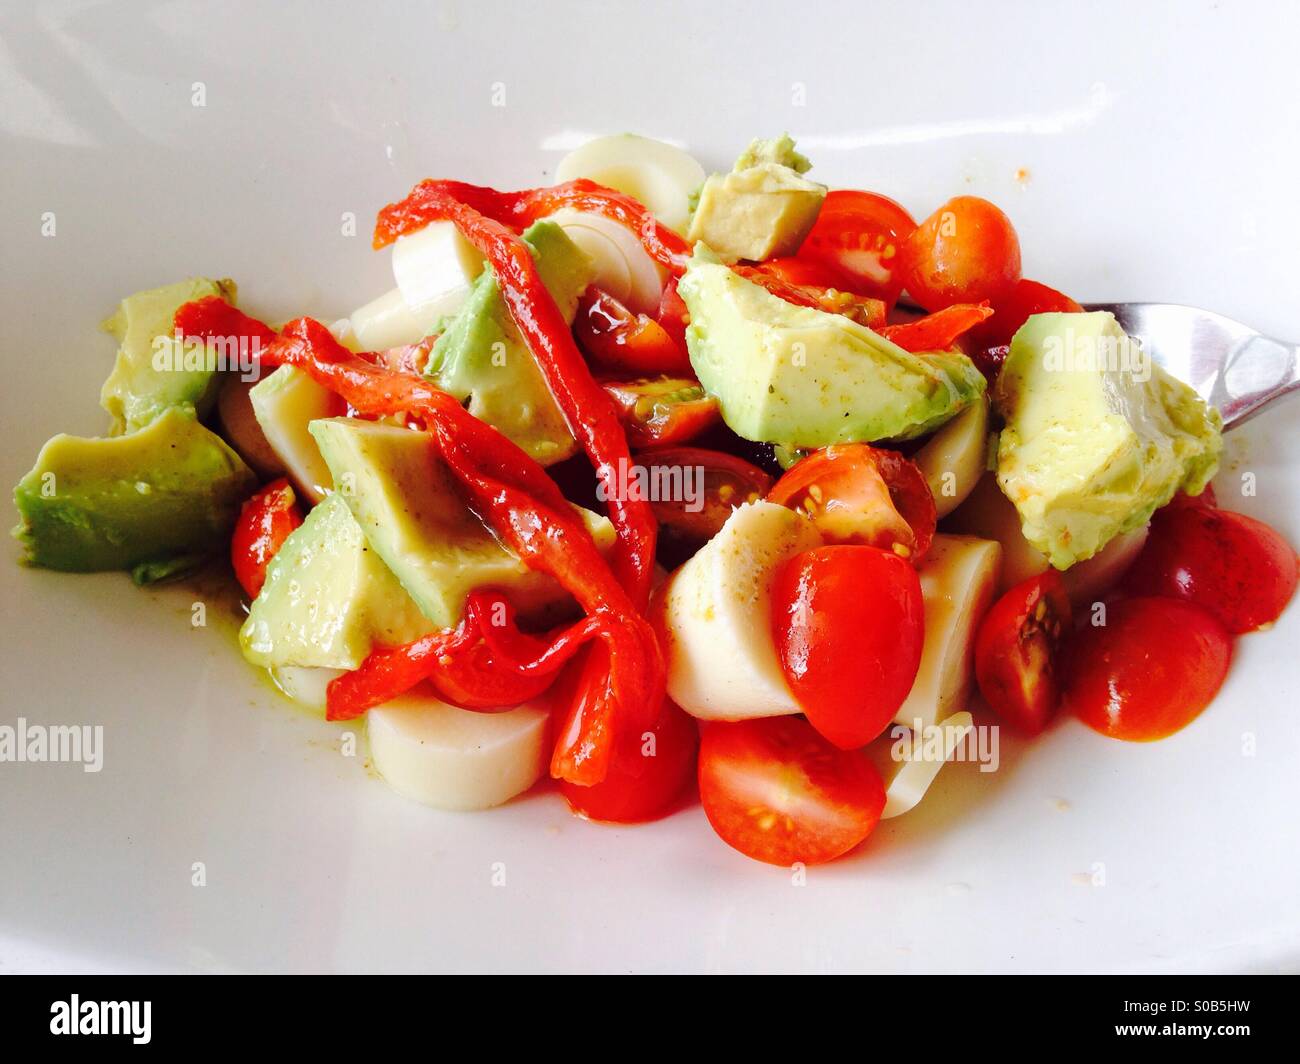 Palm fruit, tomato, avocado and roasted red pepper salad, Costa Rica Stock Photo